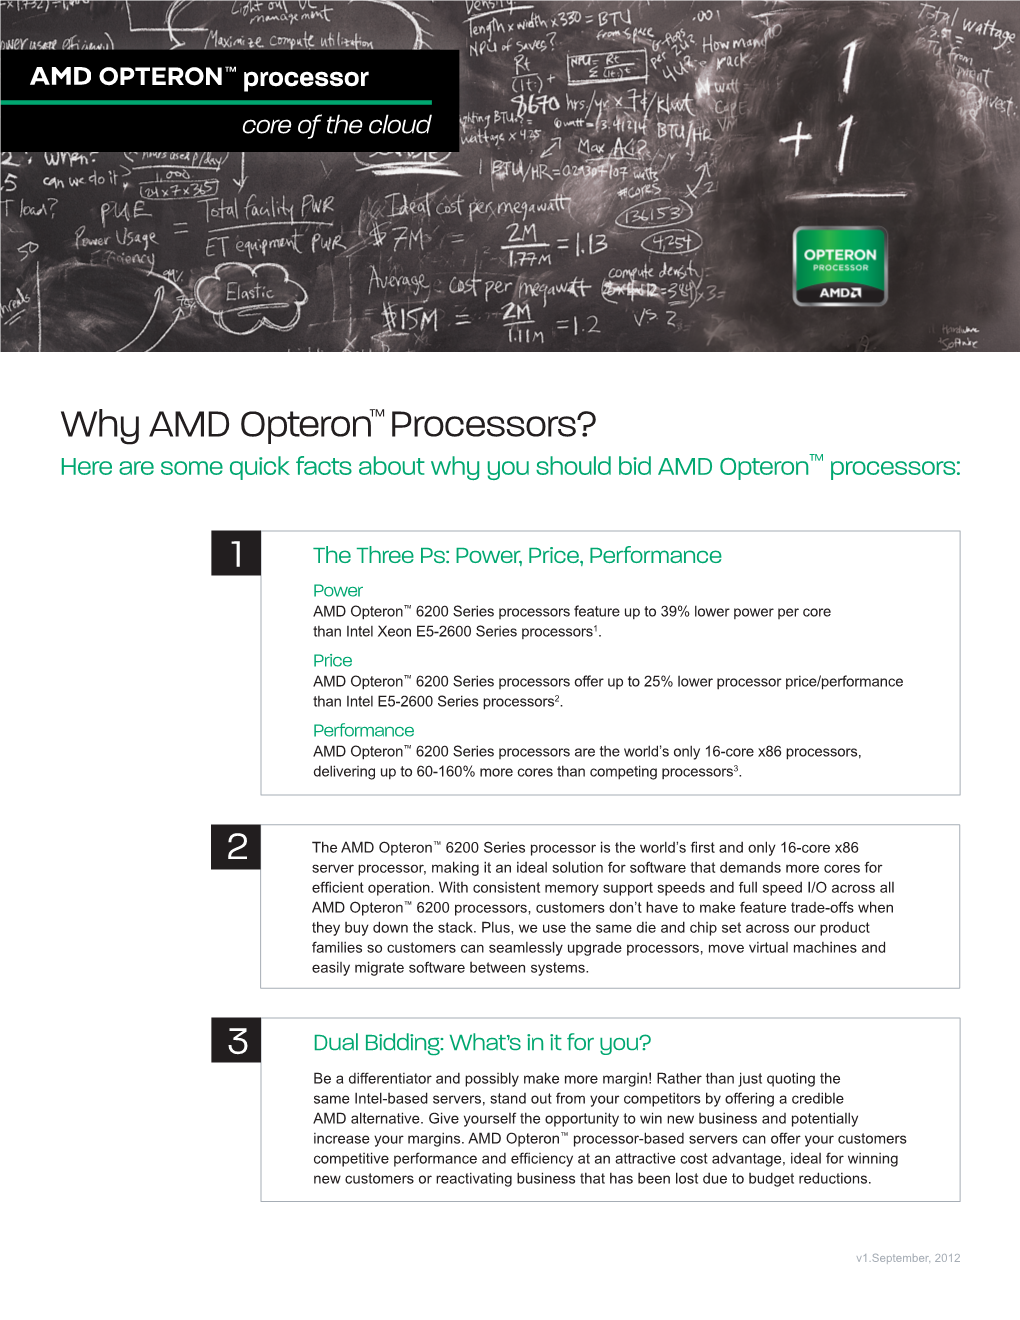 Why AMD Opteron Processors?